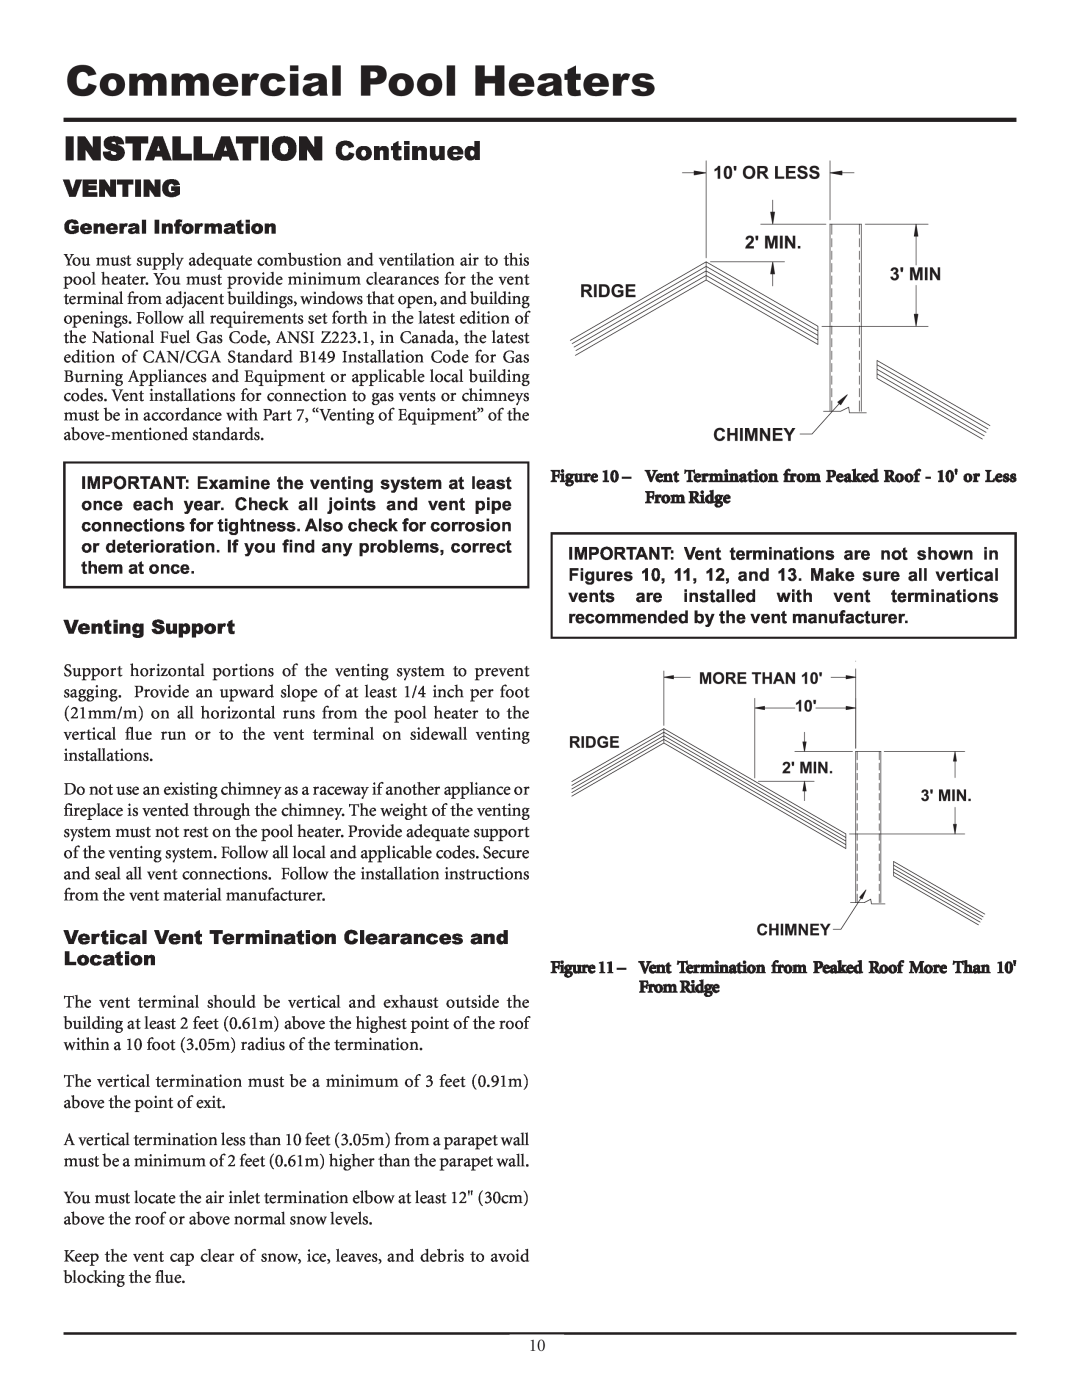 Lochinvar F0600187510 General Information, Venting Support, Vertical Vent Termination Clearances and Location 